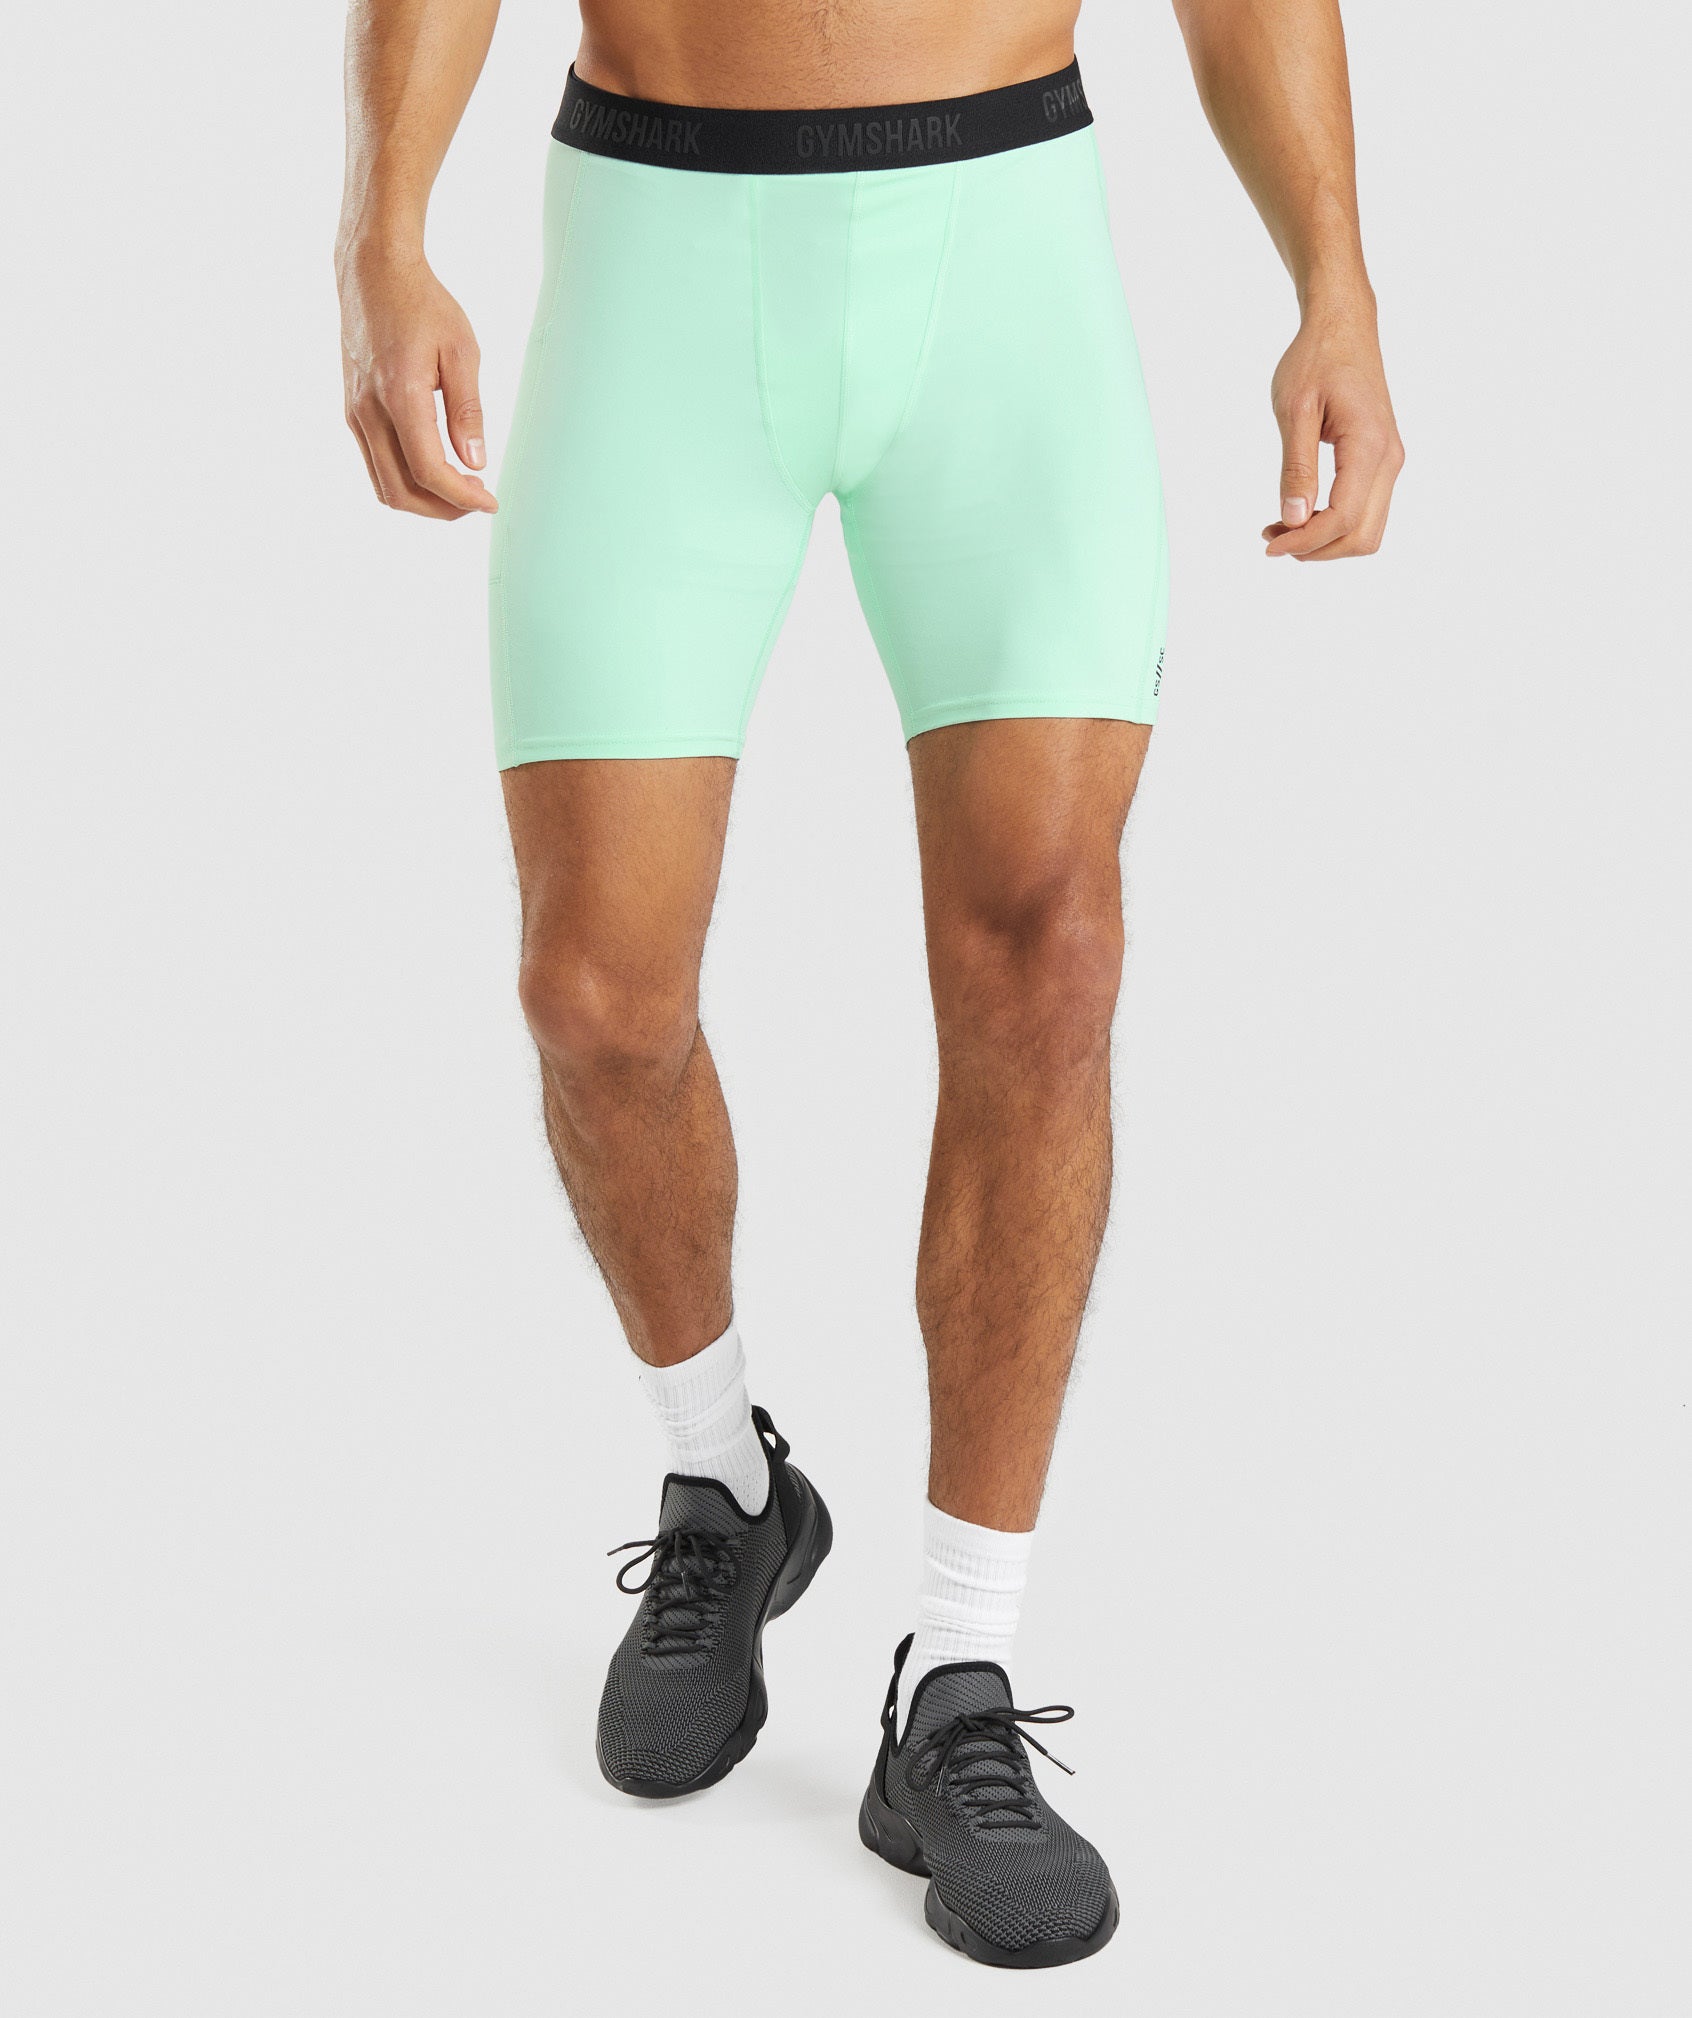 Gymshark//Steve Cook Baselayer Shorts in Turbo Blue - view 3